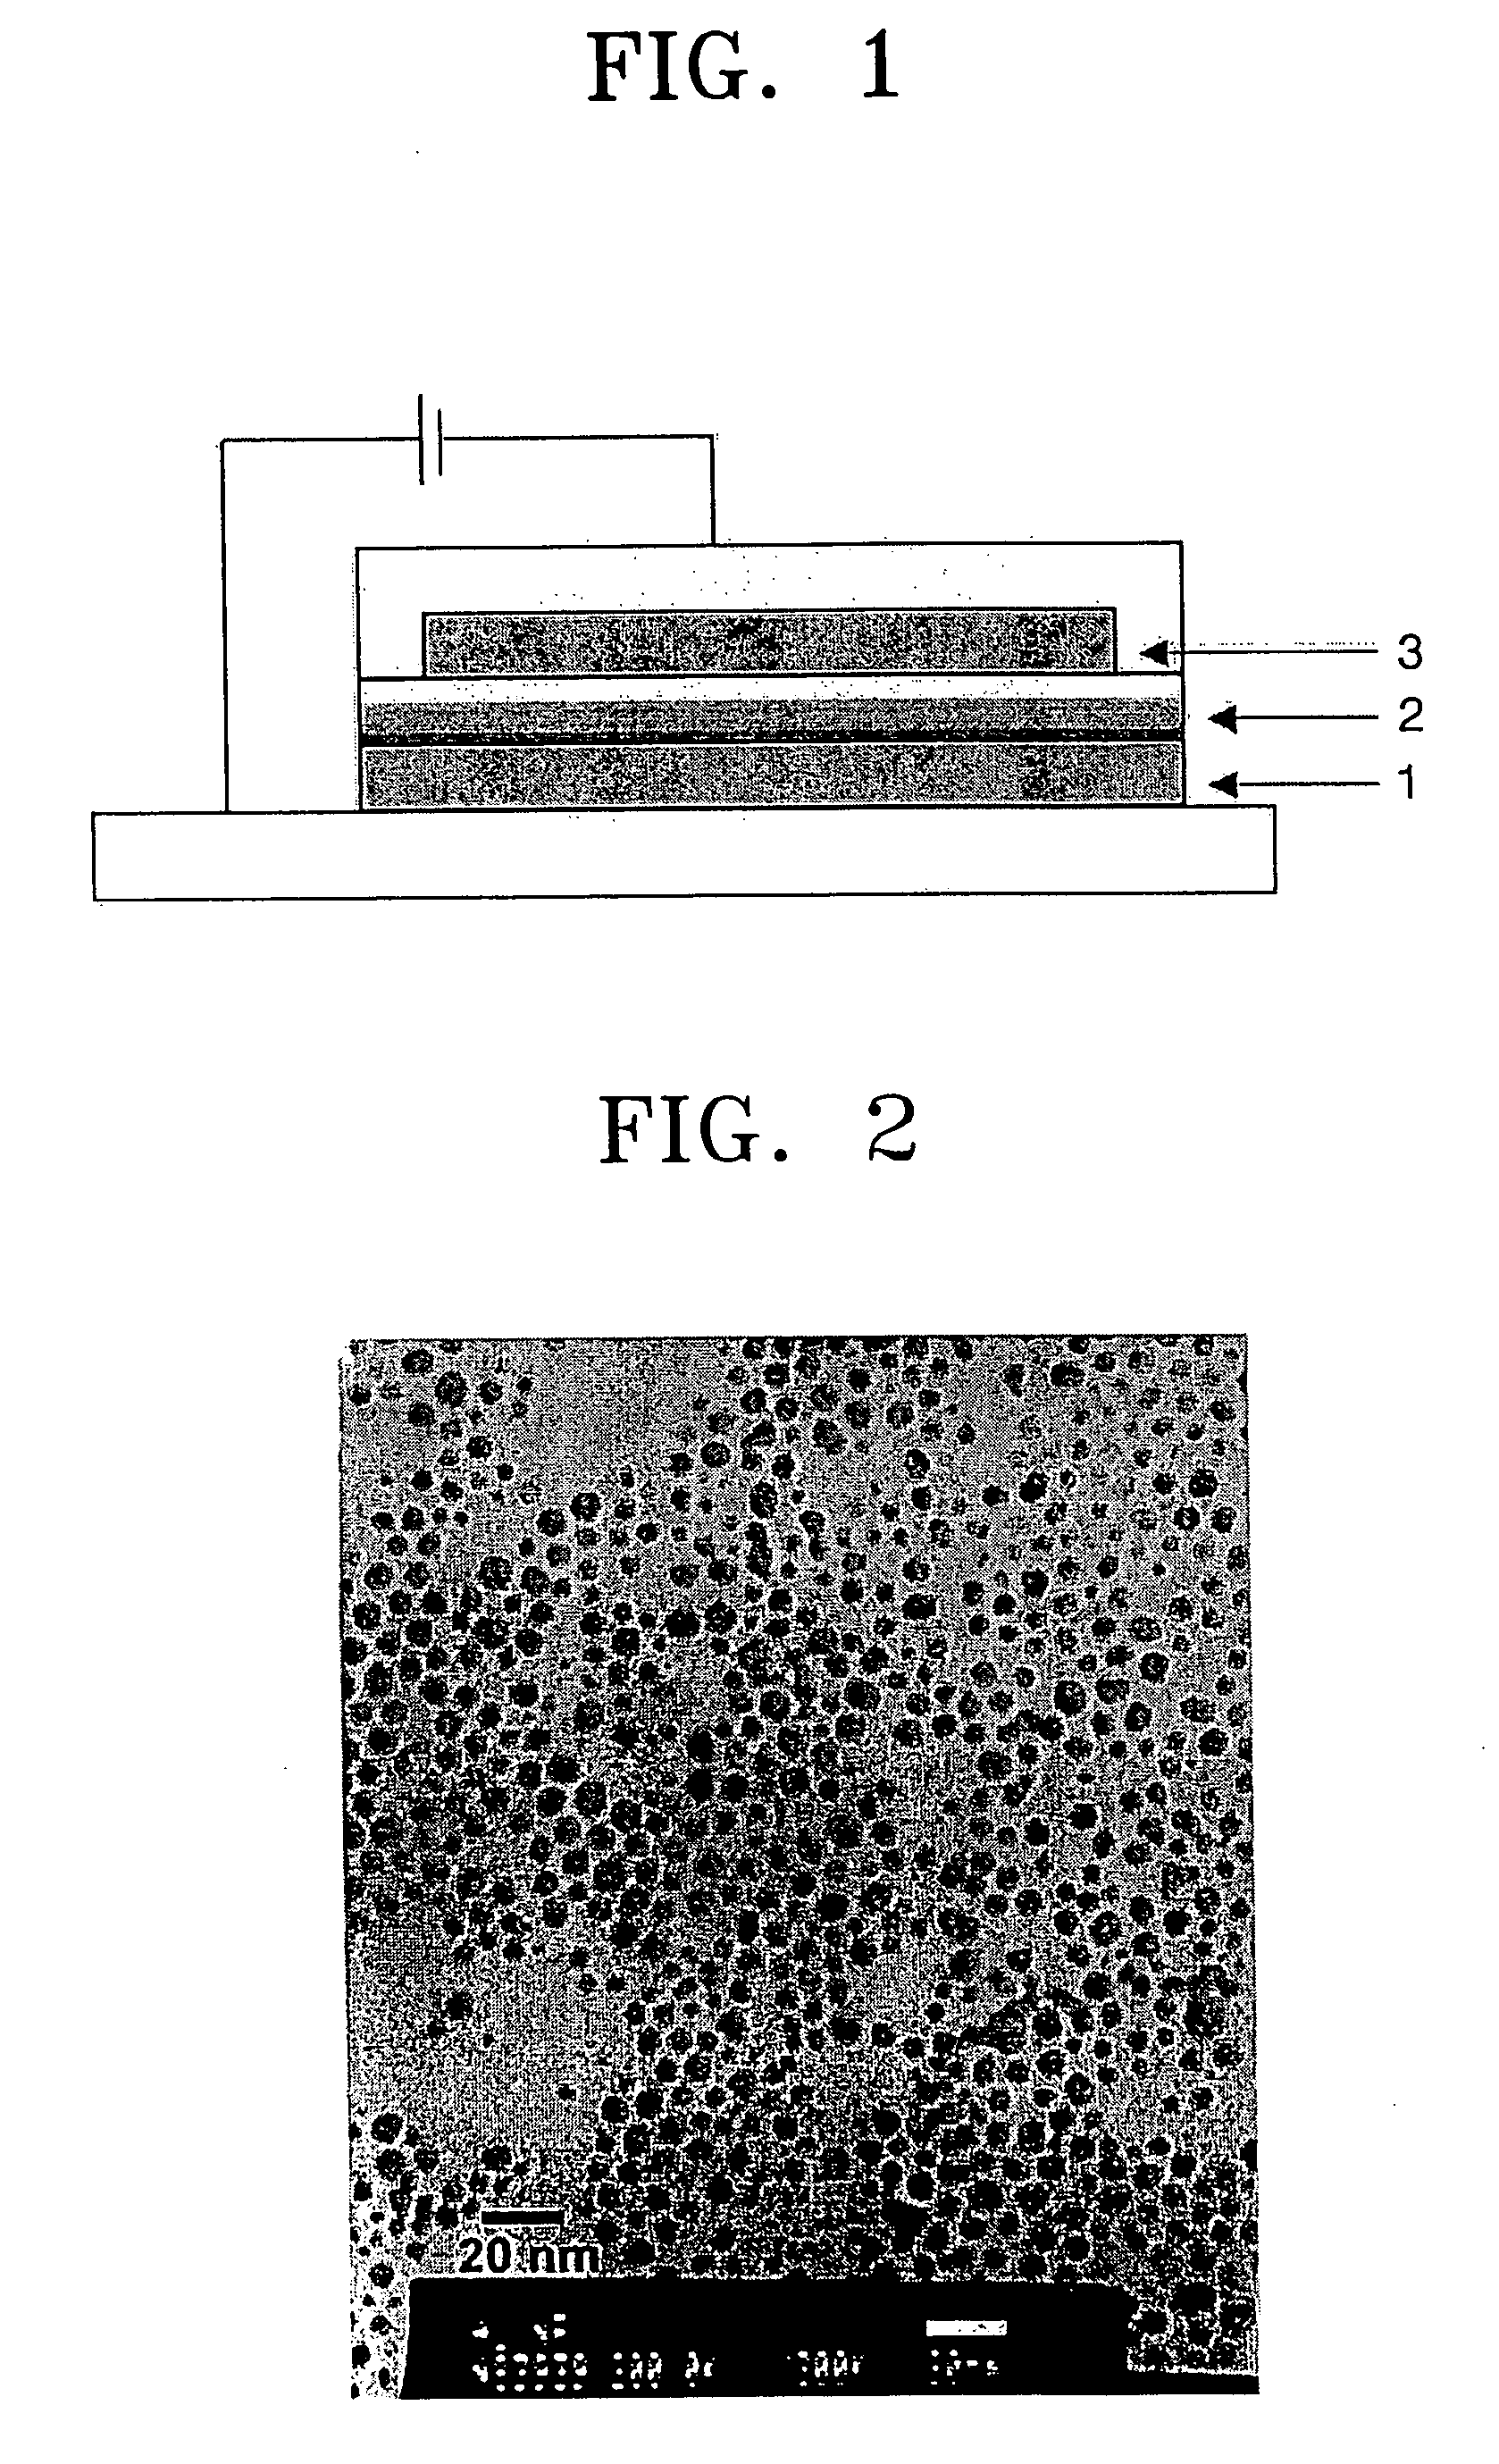 Electroluminescent device using metal nanoparticles